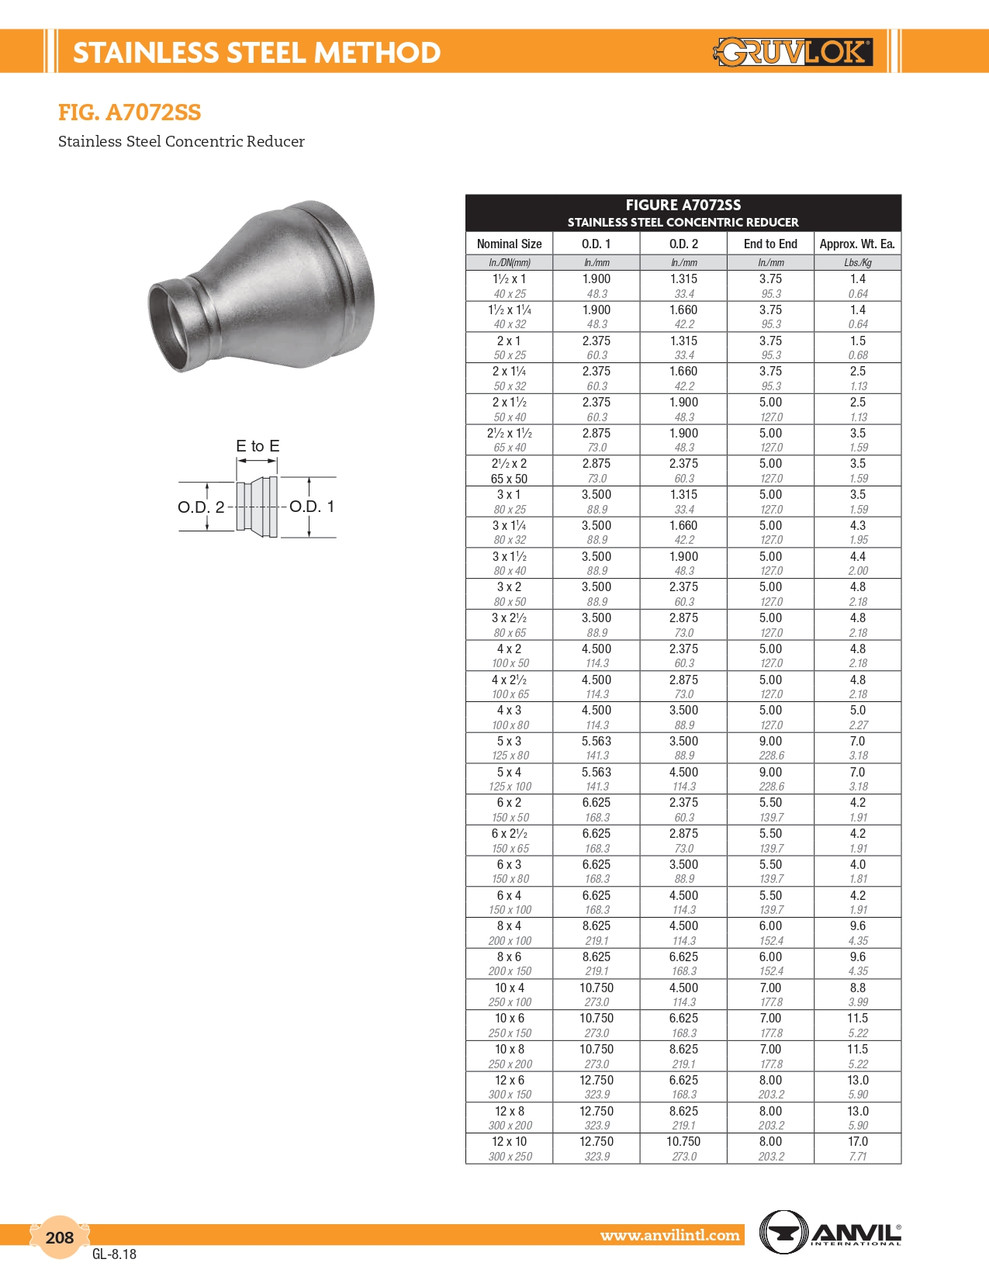 Fig. A7072SS Stainless Concentric Reducer 12 x 8"